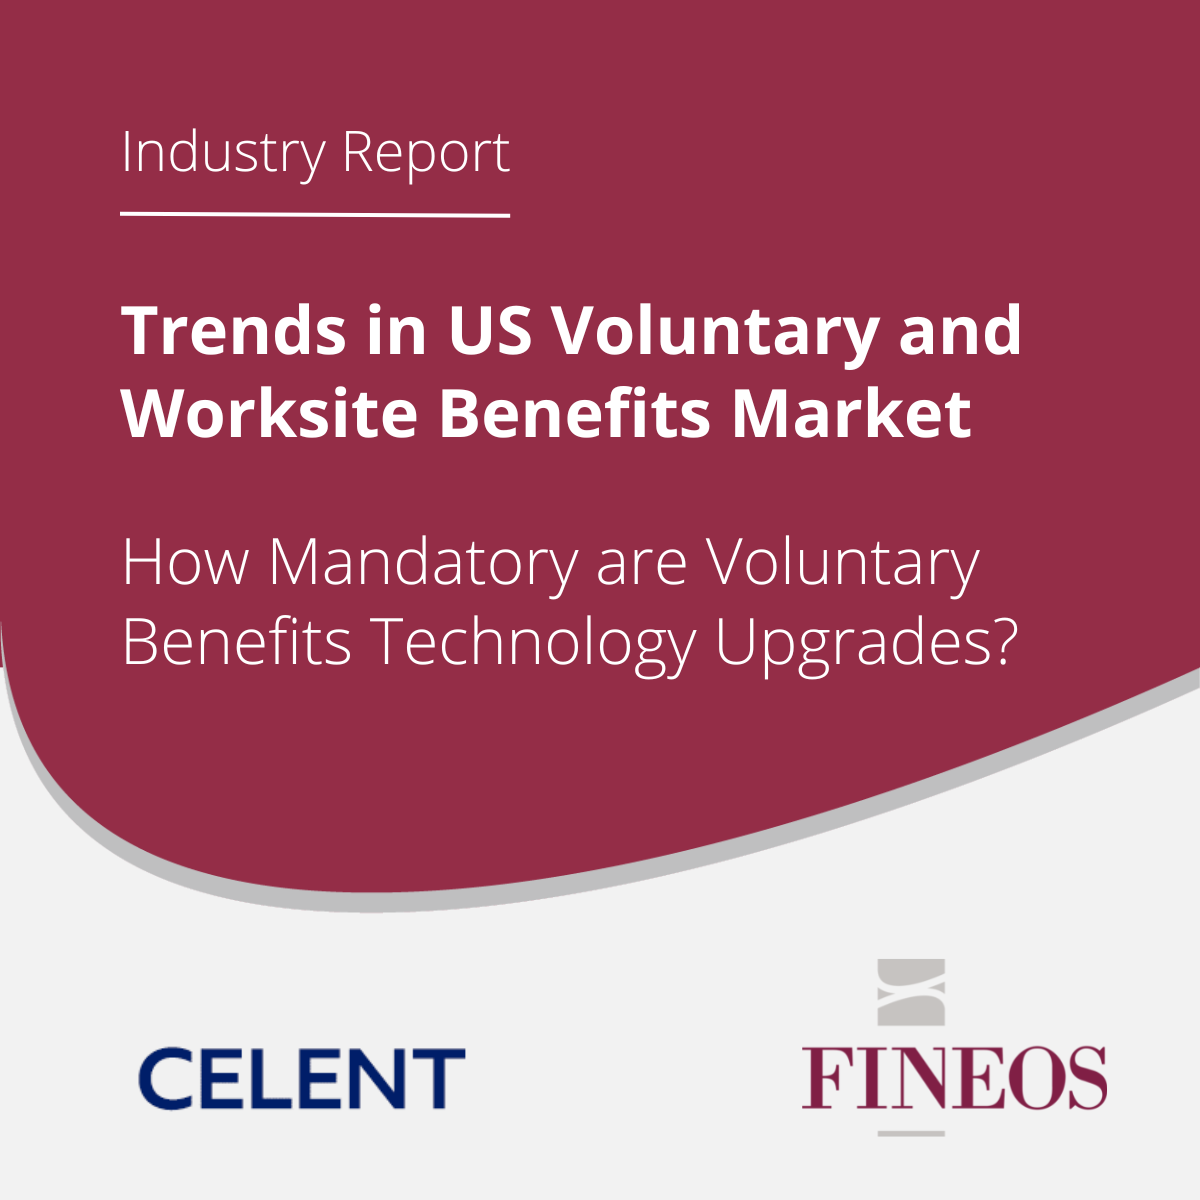 Trends in US Voluntary and Worksite Benefits Market | FINEOS Celent Industry Report